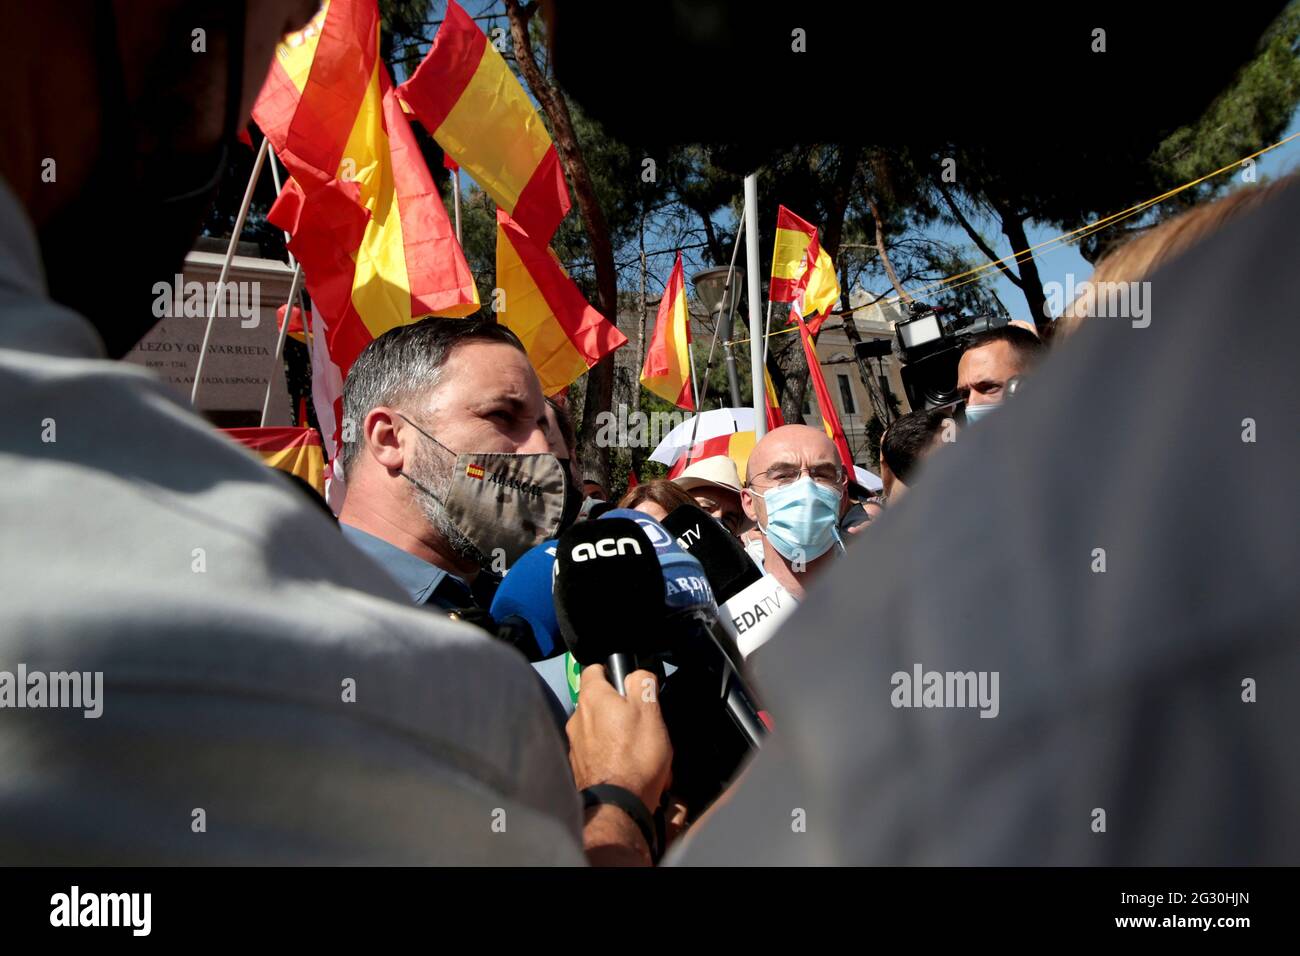 Madrid, Spain; 13.06.2021.- Santiago Abascal leader of Vox the politician with the greatest presence in the demonstration in the Plaza de Colon, at the monument to the Spanish admiral Blas de Lezo, who was one-eyed, lame and one-eyed. 'Unión 78' platform led by the Spanish politician Rosa Díez, the group that convened the meeting of the far-right in the Plaza de Colón in Madrid, to protest the possible pardons to the imprisoned Catalan independence politicians. Among thousands of people who filled the square and the adjacent streets with Spanish flags, the attendees shouted slogans such as 'Ma Stock Photo